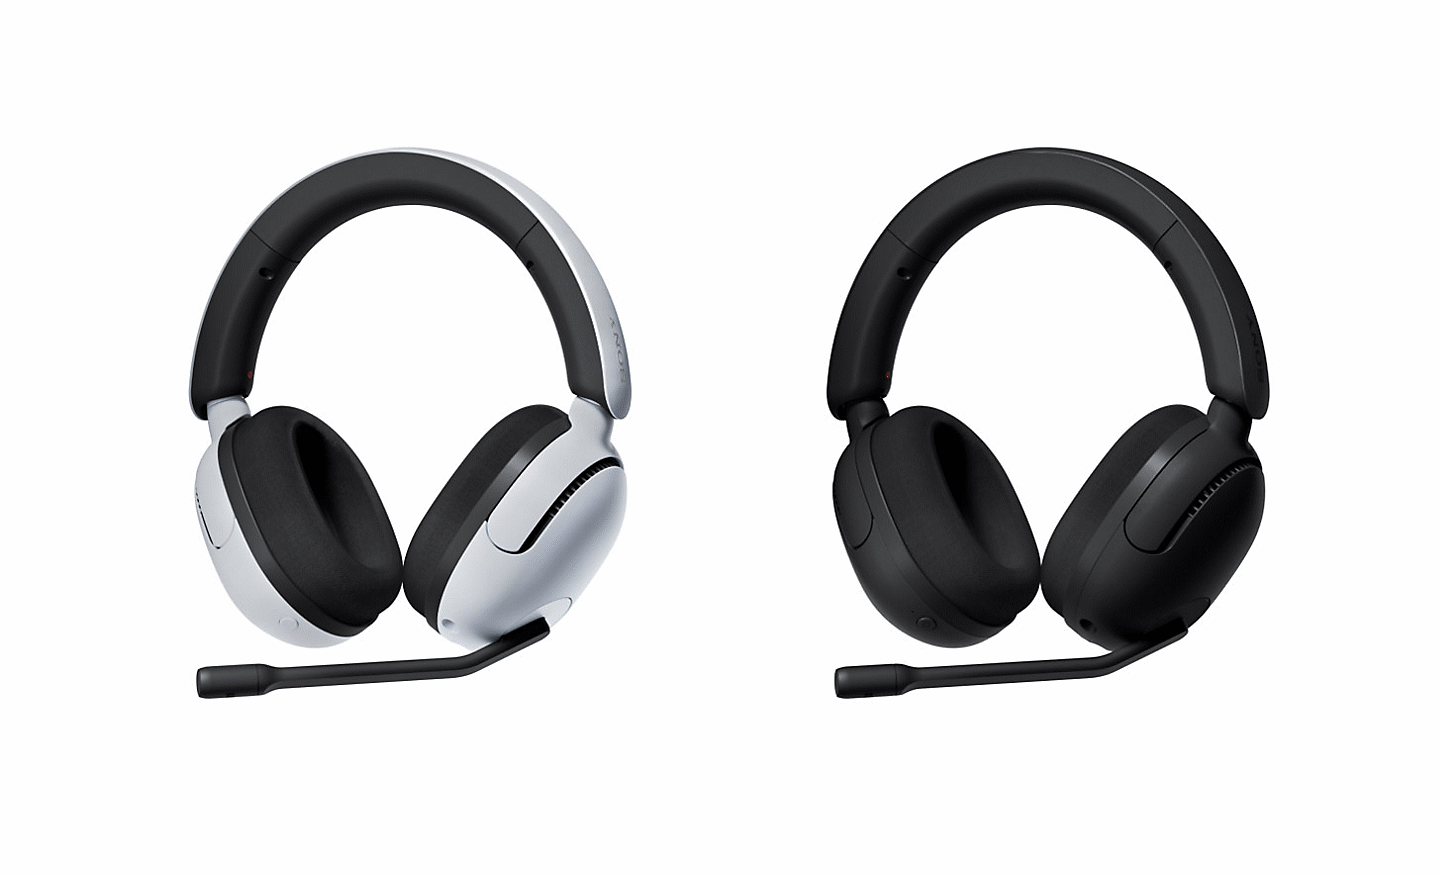 Front image of two INZONE H5 headphones, one in black and one in white